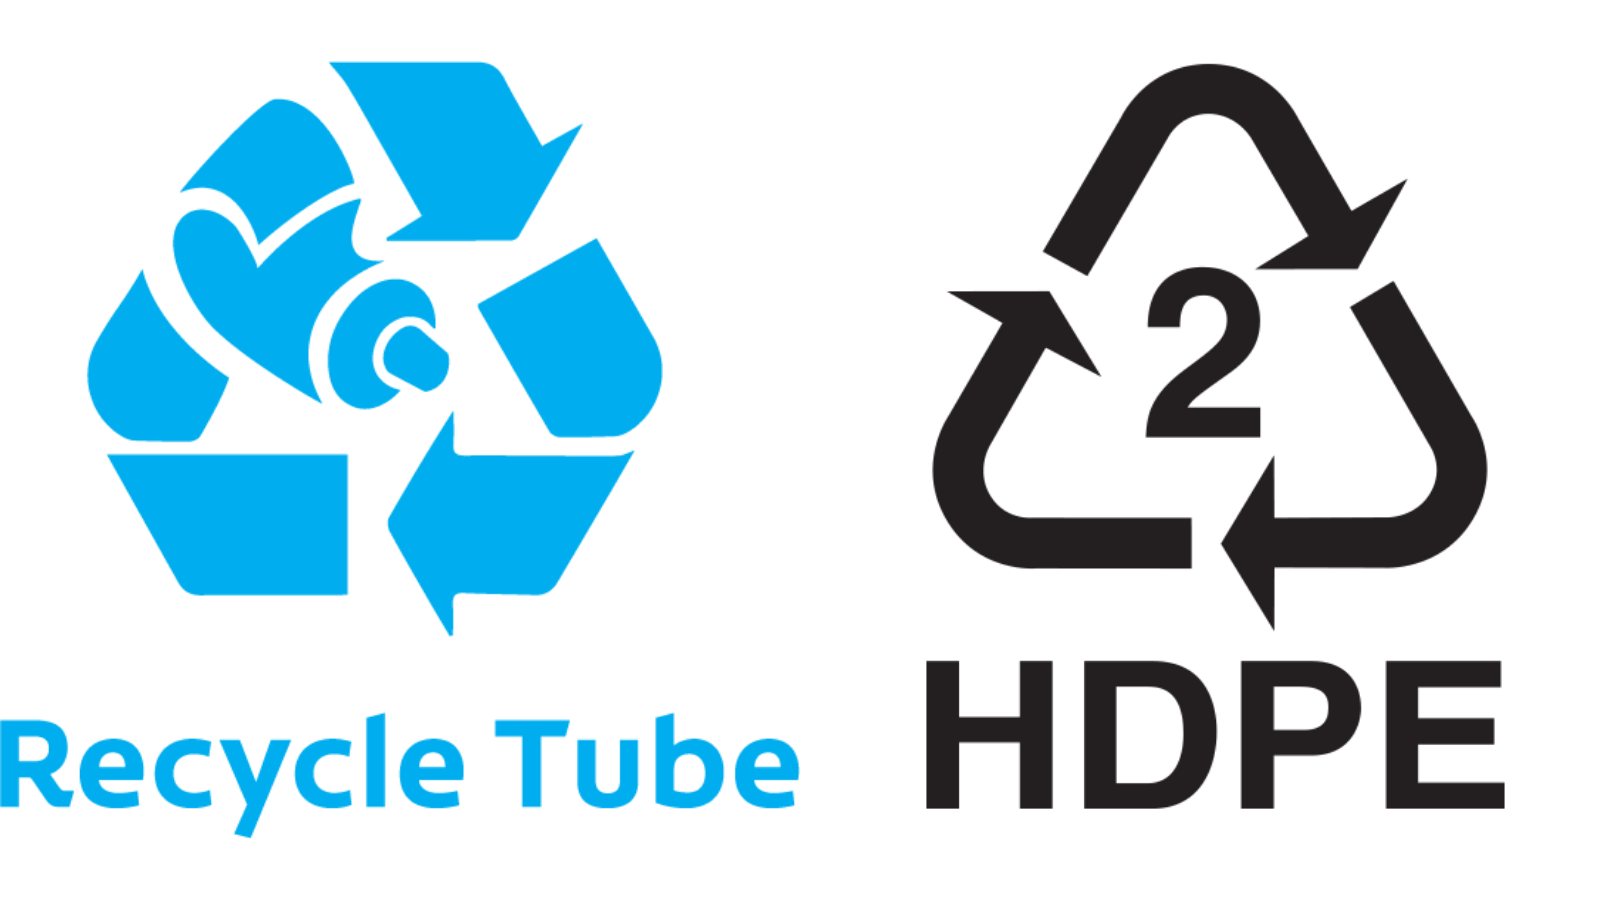 Recyclable Toothpaste tube logo